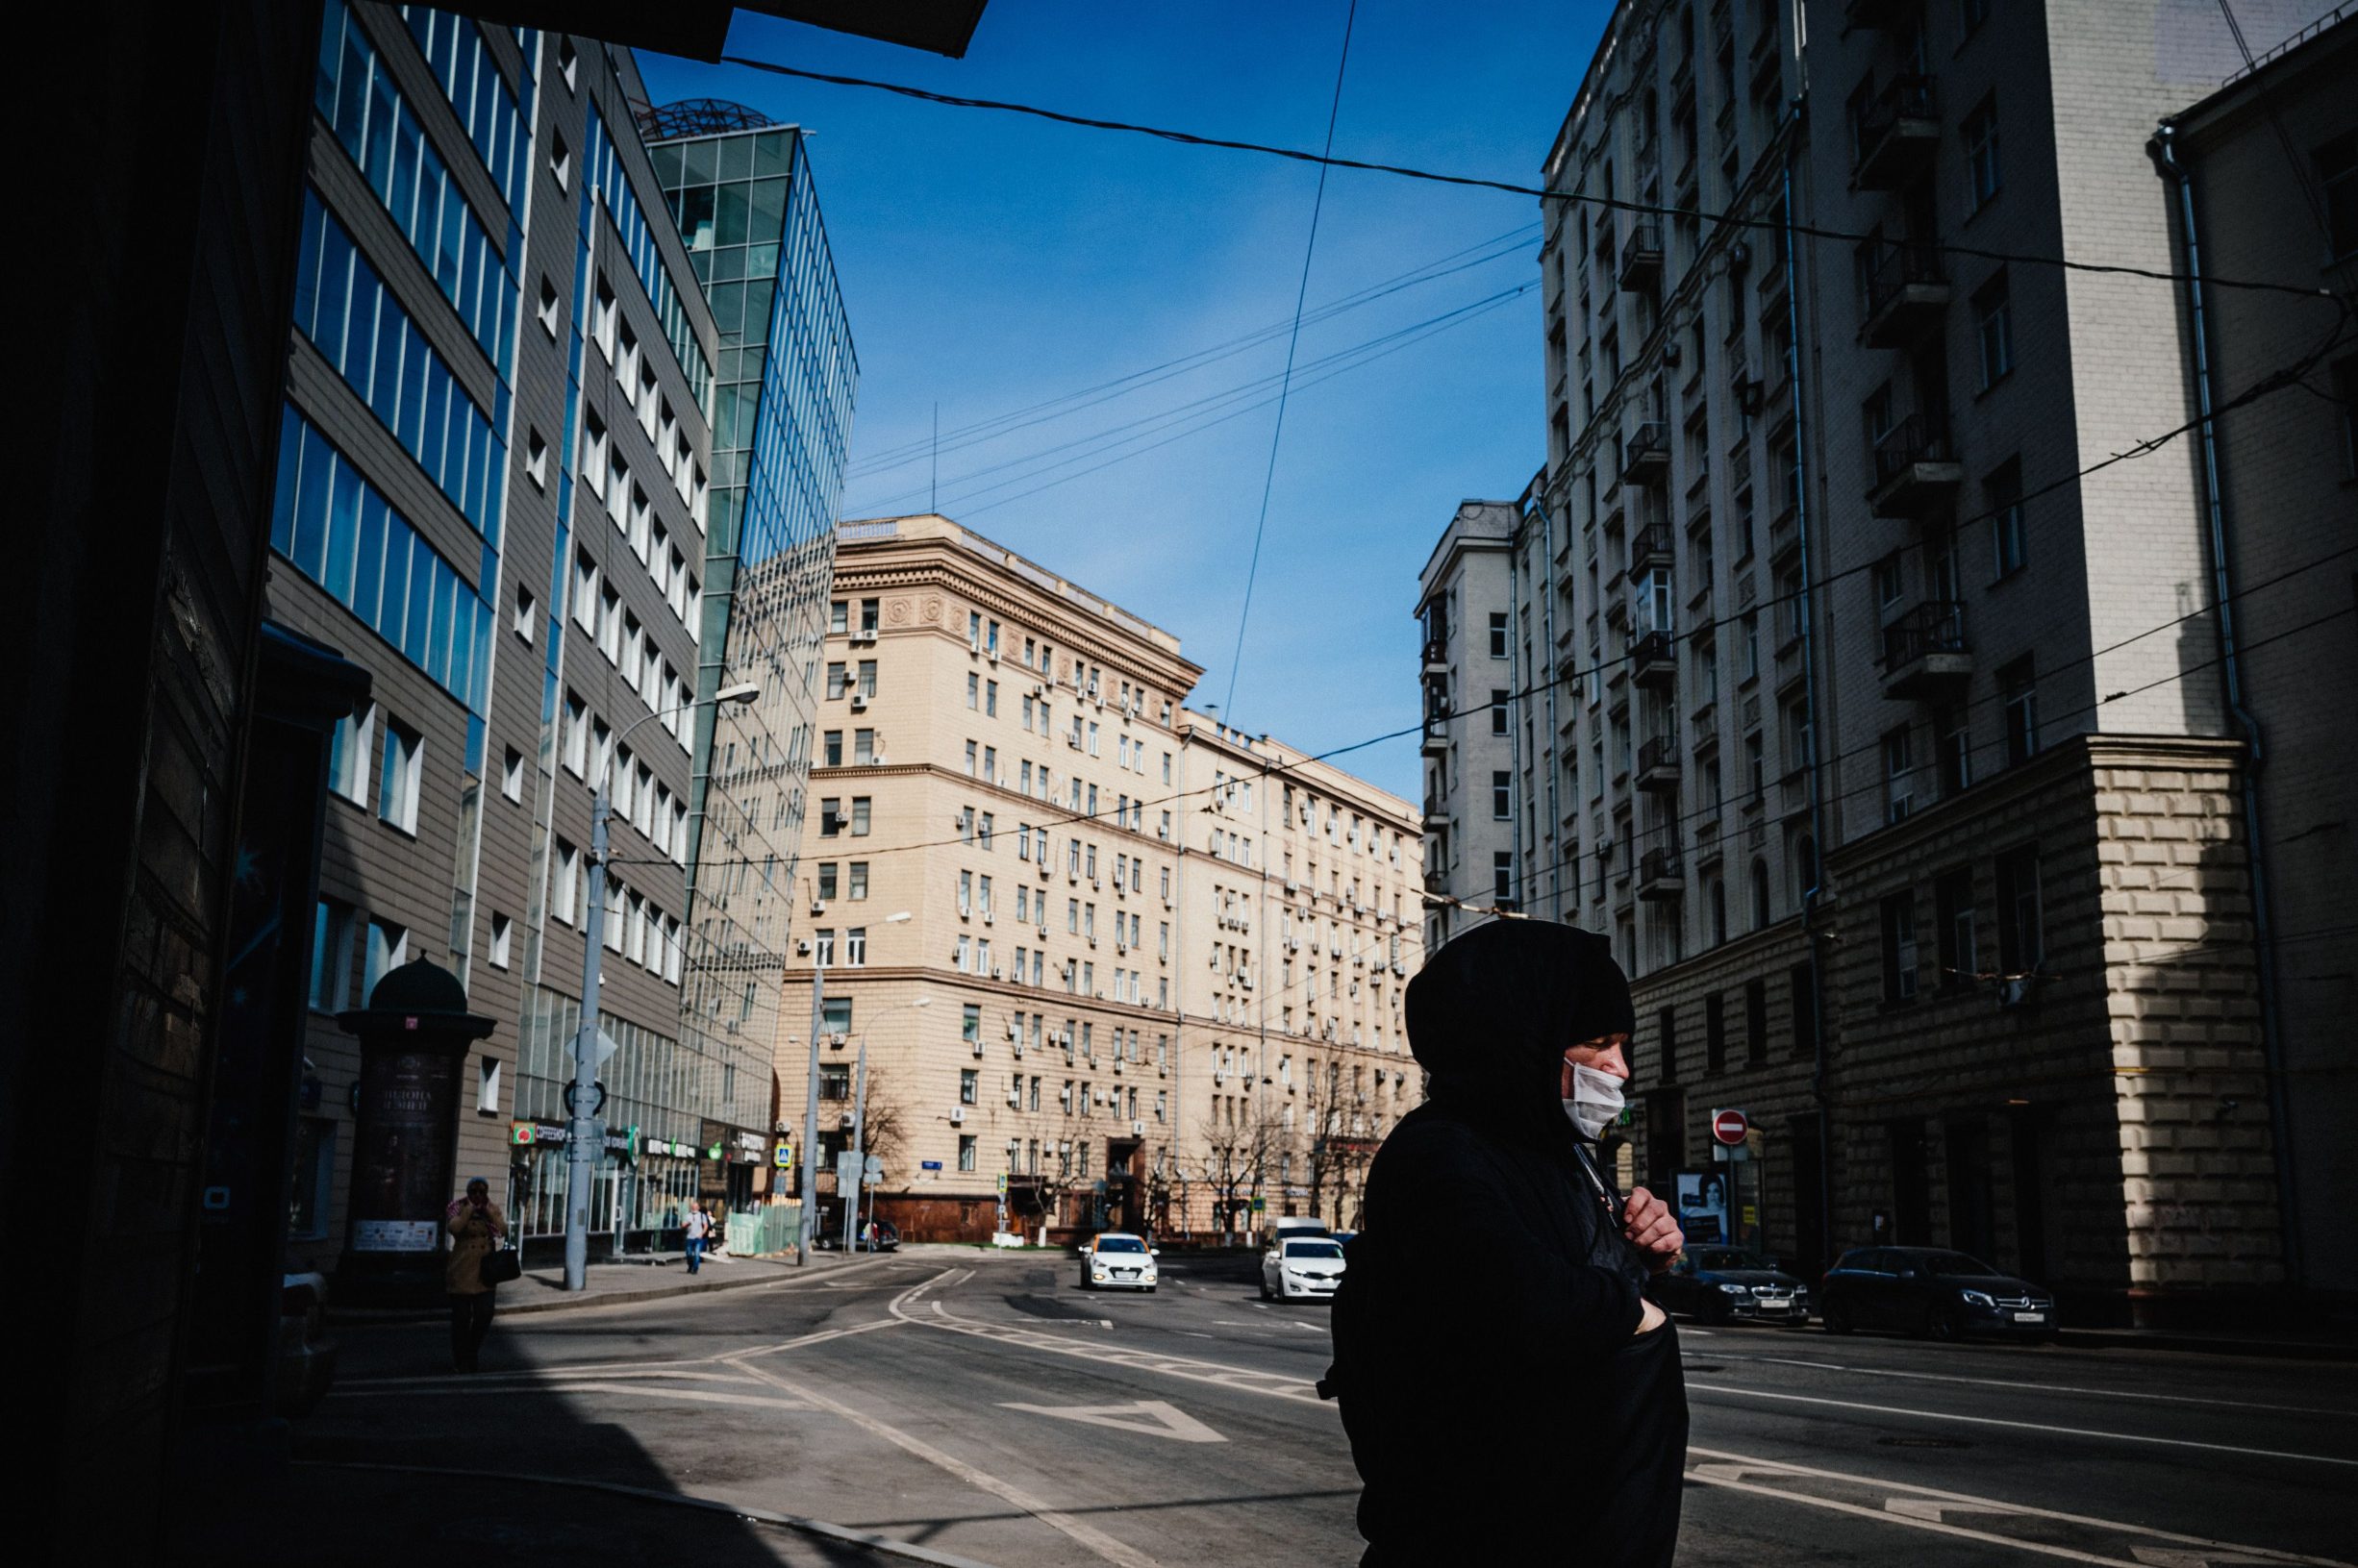 A man wearing a face mask walks in Moscow on April 9, 2020, during the strict lockdown in Russia to stop the spread of the novel coronavirus COVID-19. (Photo by Dimitar DILKOFF / AFP)